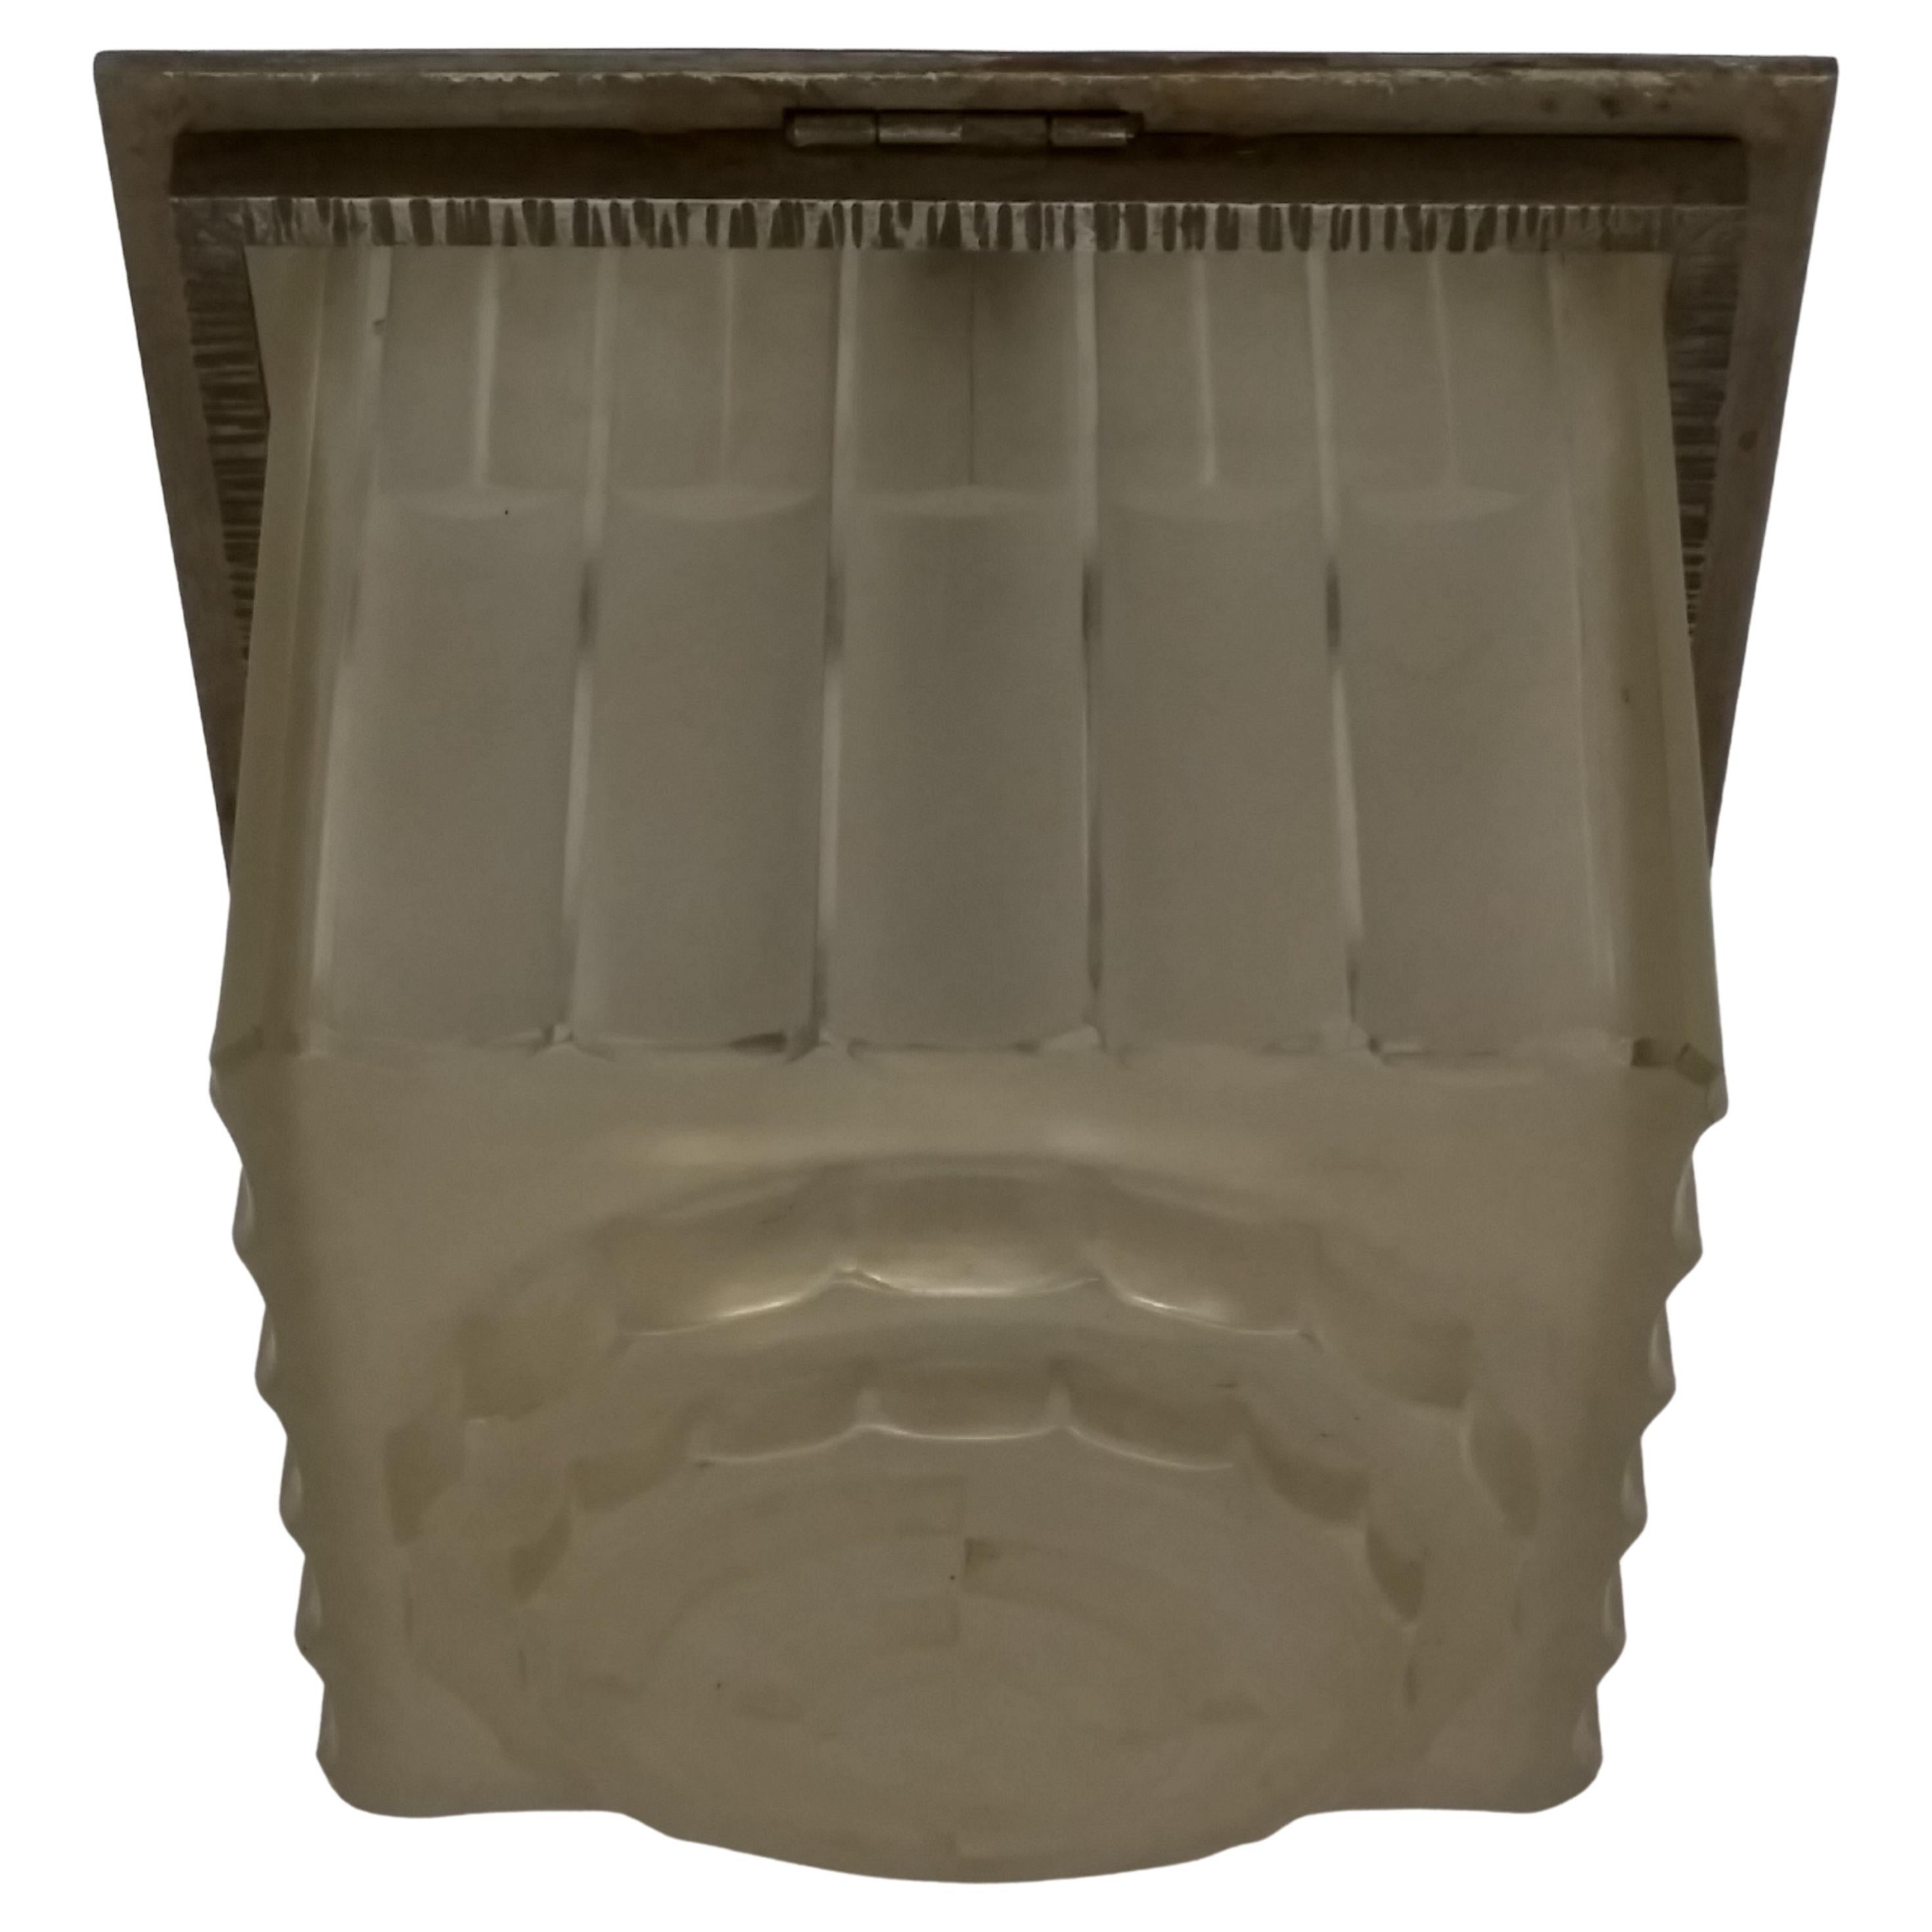 A stunning rare French Art Deco Square shaped Flush Mount was created in the 1930s by 